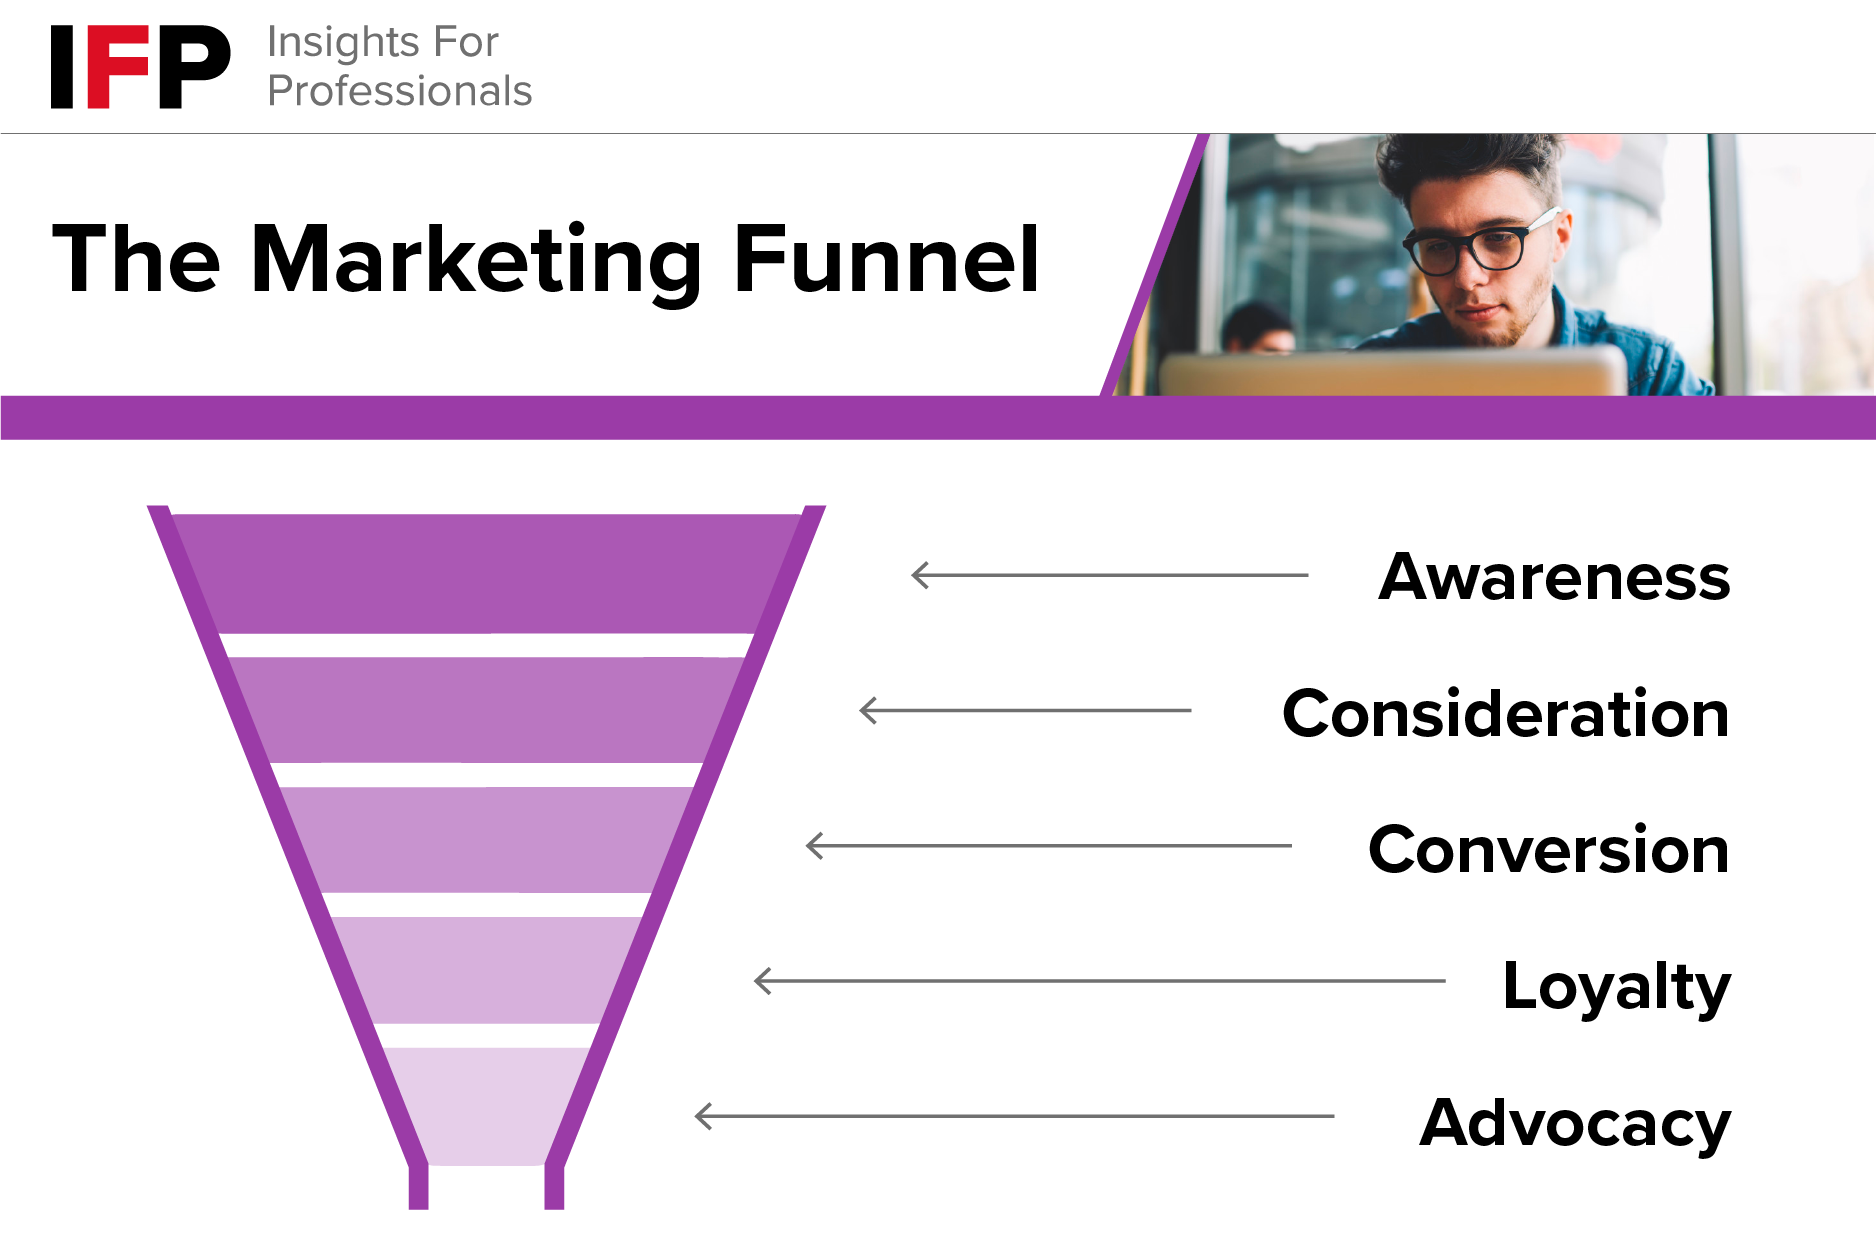 IFP marketing funnel - from awareness to advocacy